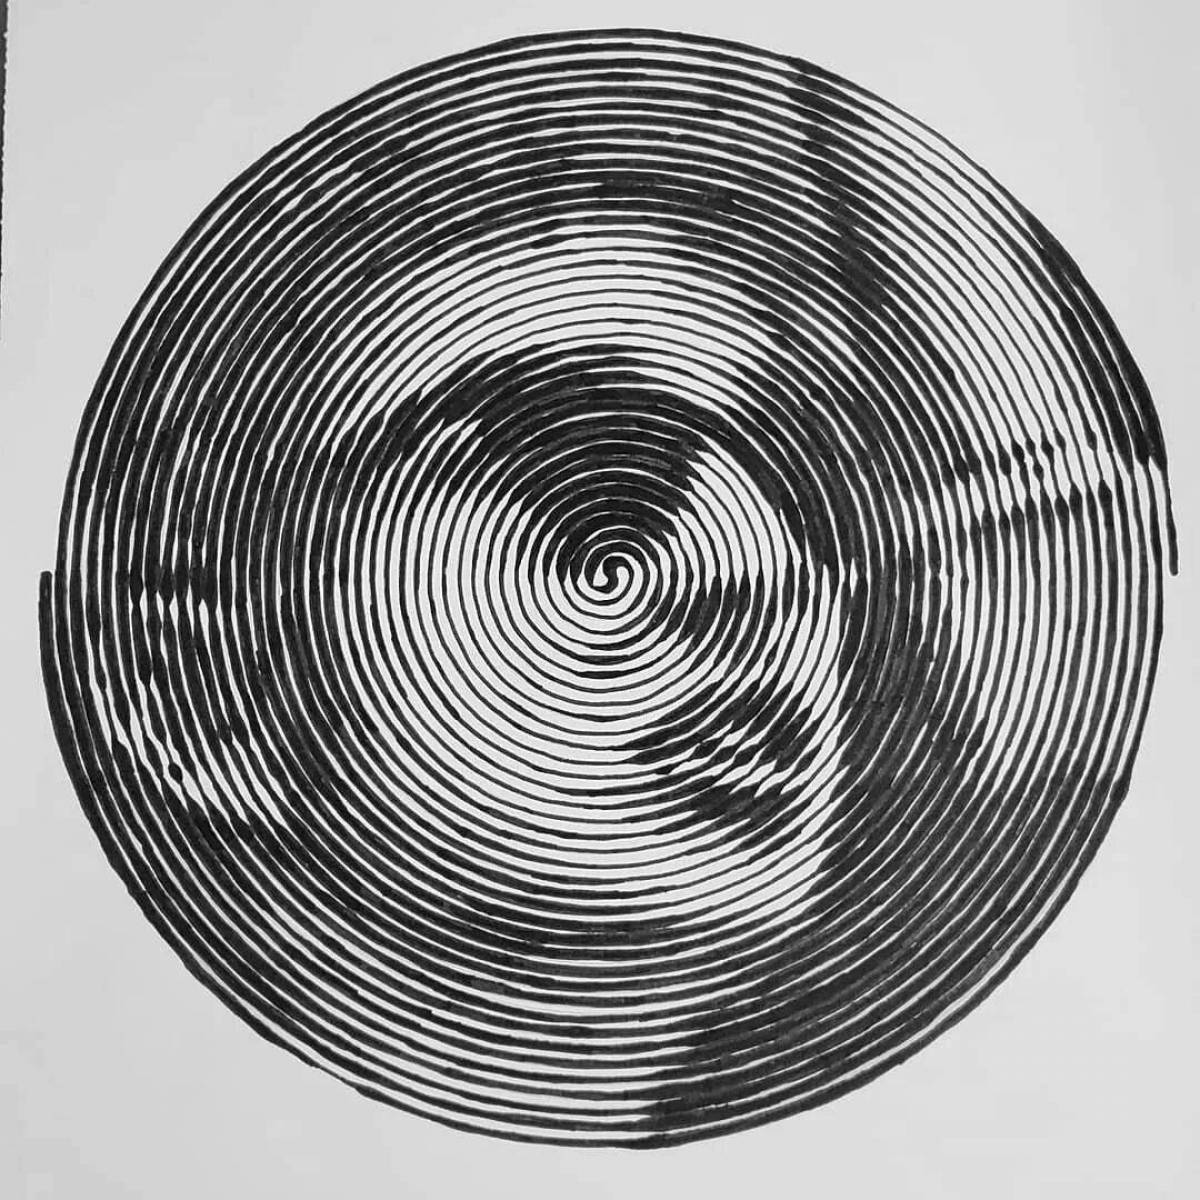 Picture in a spiral #4